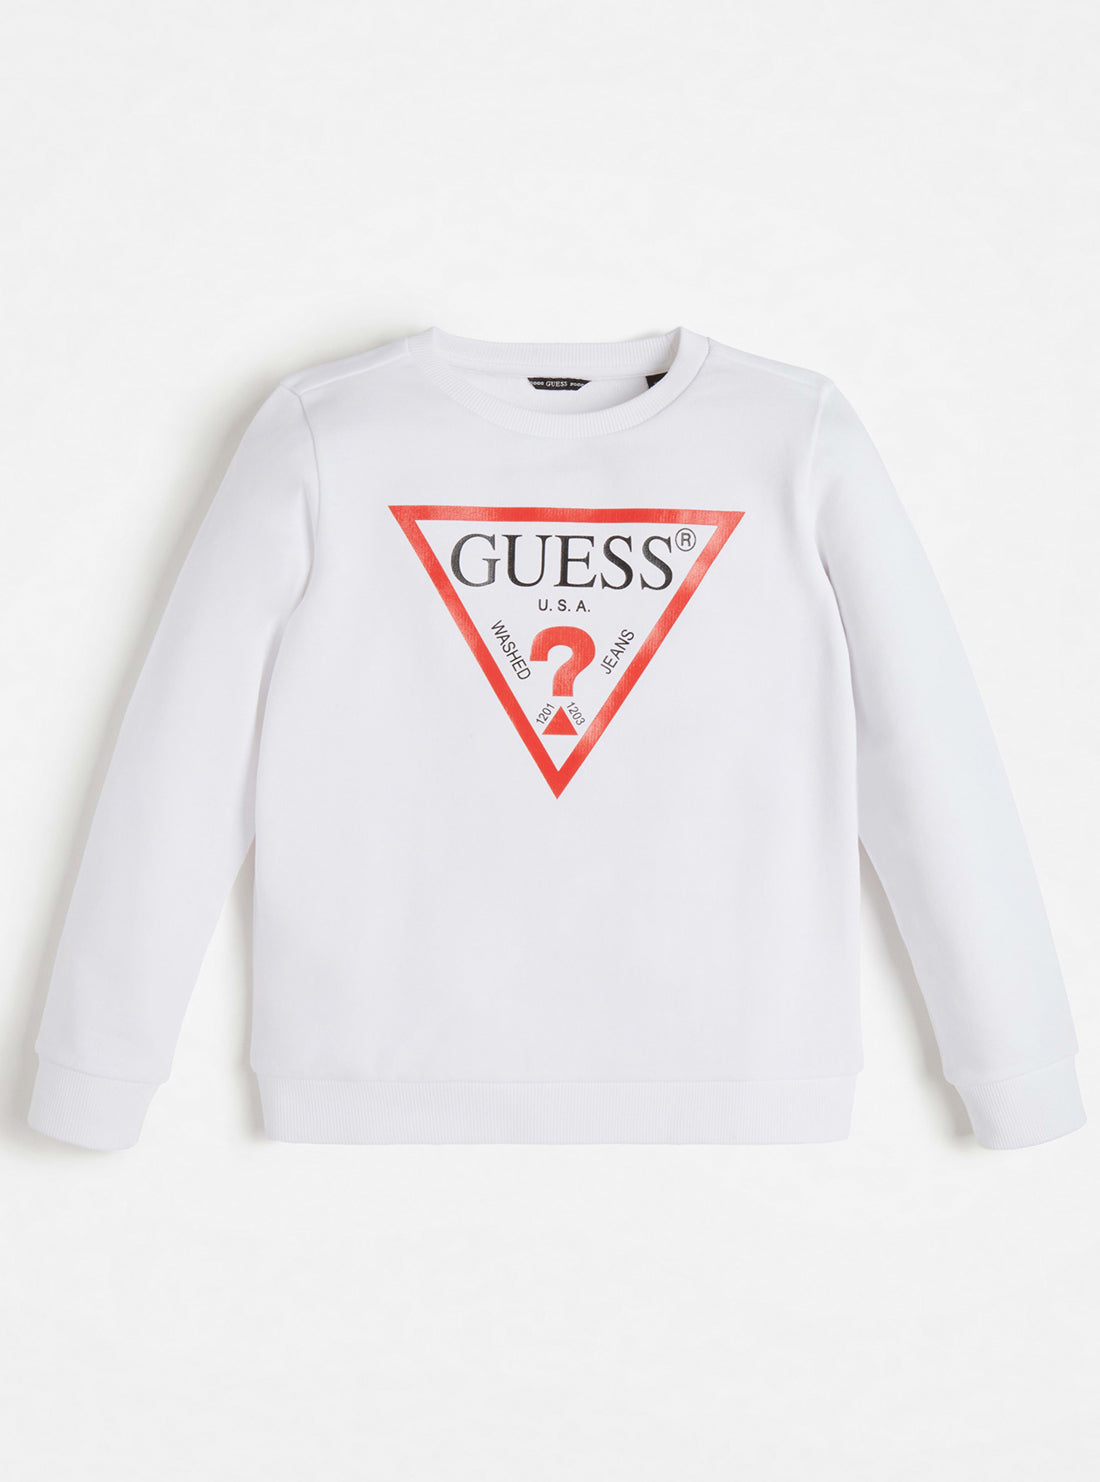 GUESS Big Boys White Long Sleeve Fleece Pullover Top (7-16) L73Q09K5WK0 Front View